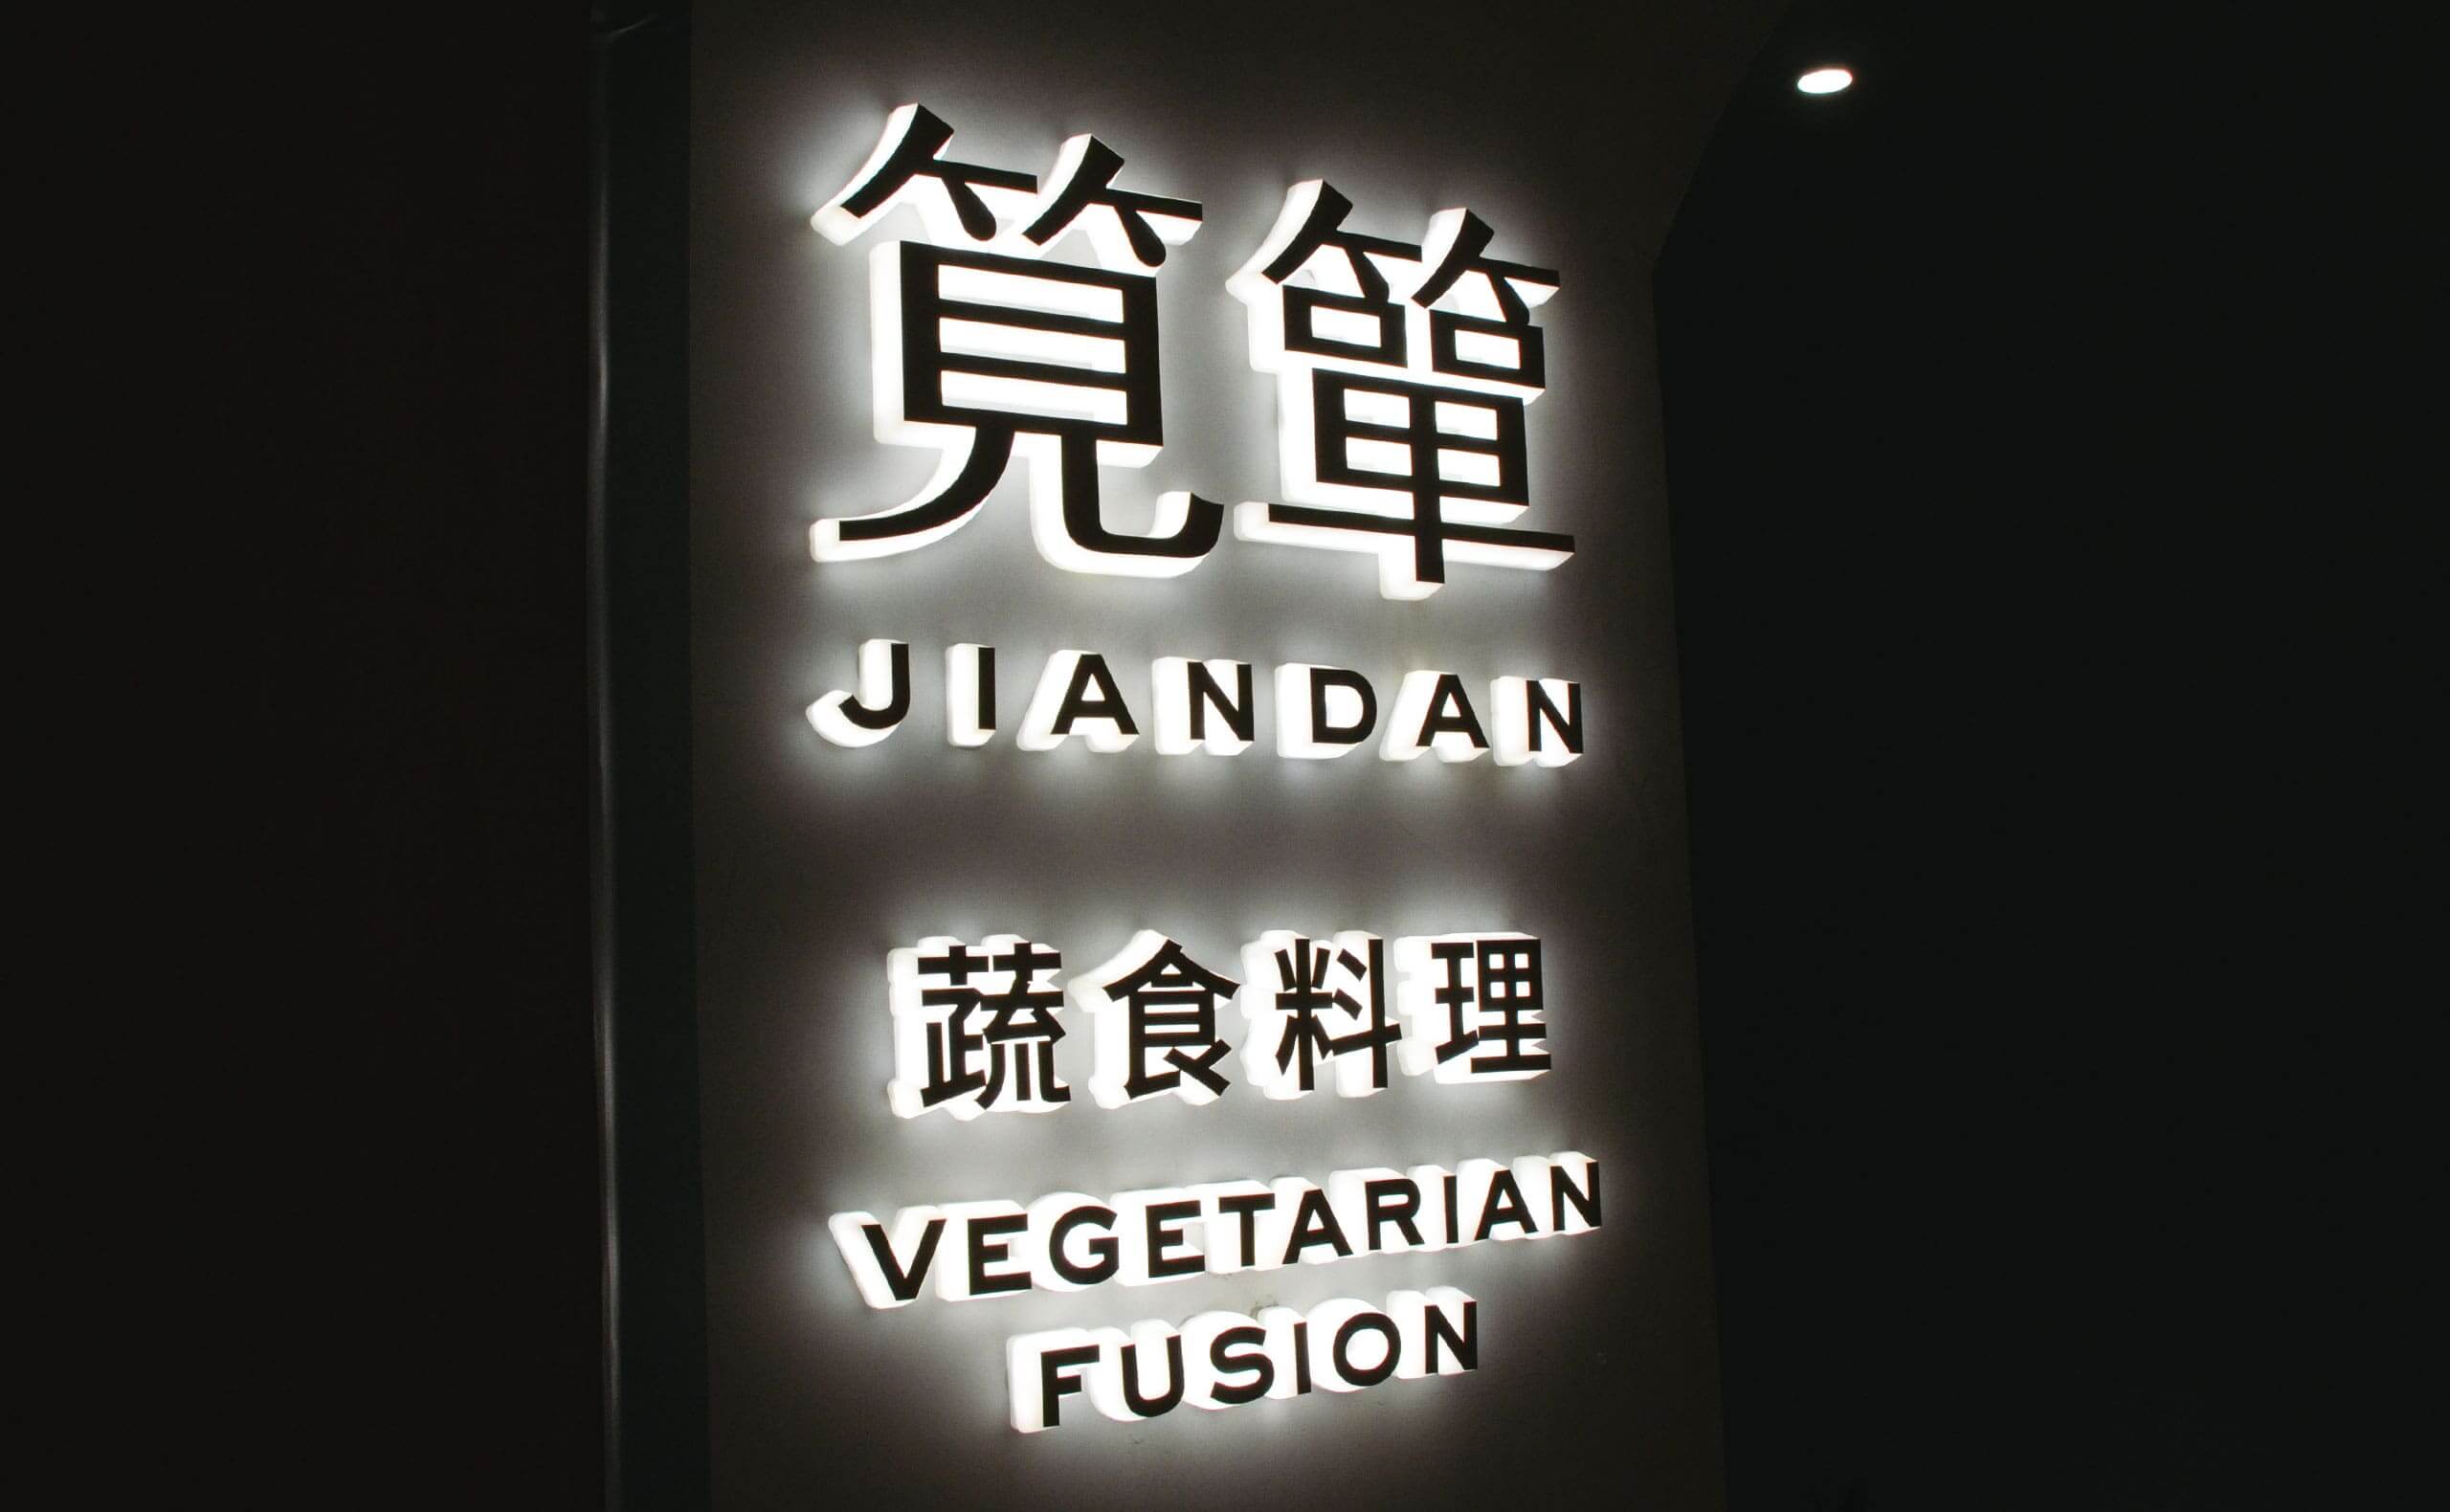 Side Lit Channel Letters With Metal Front Surface For Jiandan Restaurant